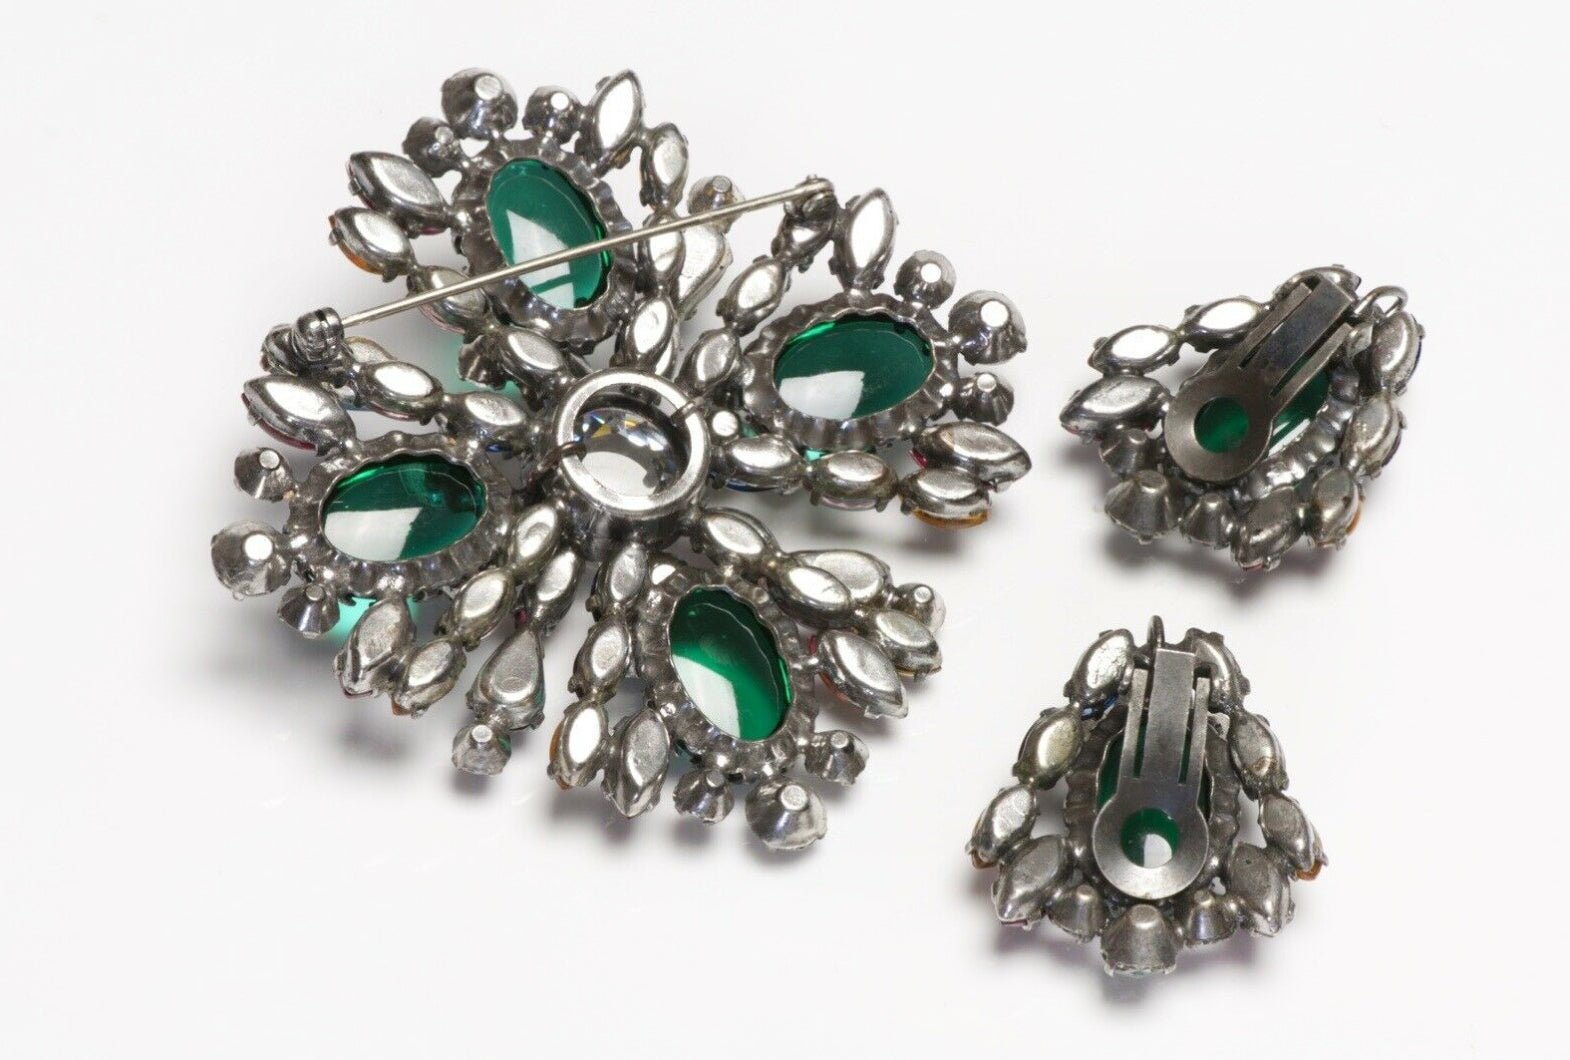 SCHREINER NY 1950’s Green Pink Crystal Brooch Earrings Set